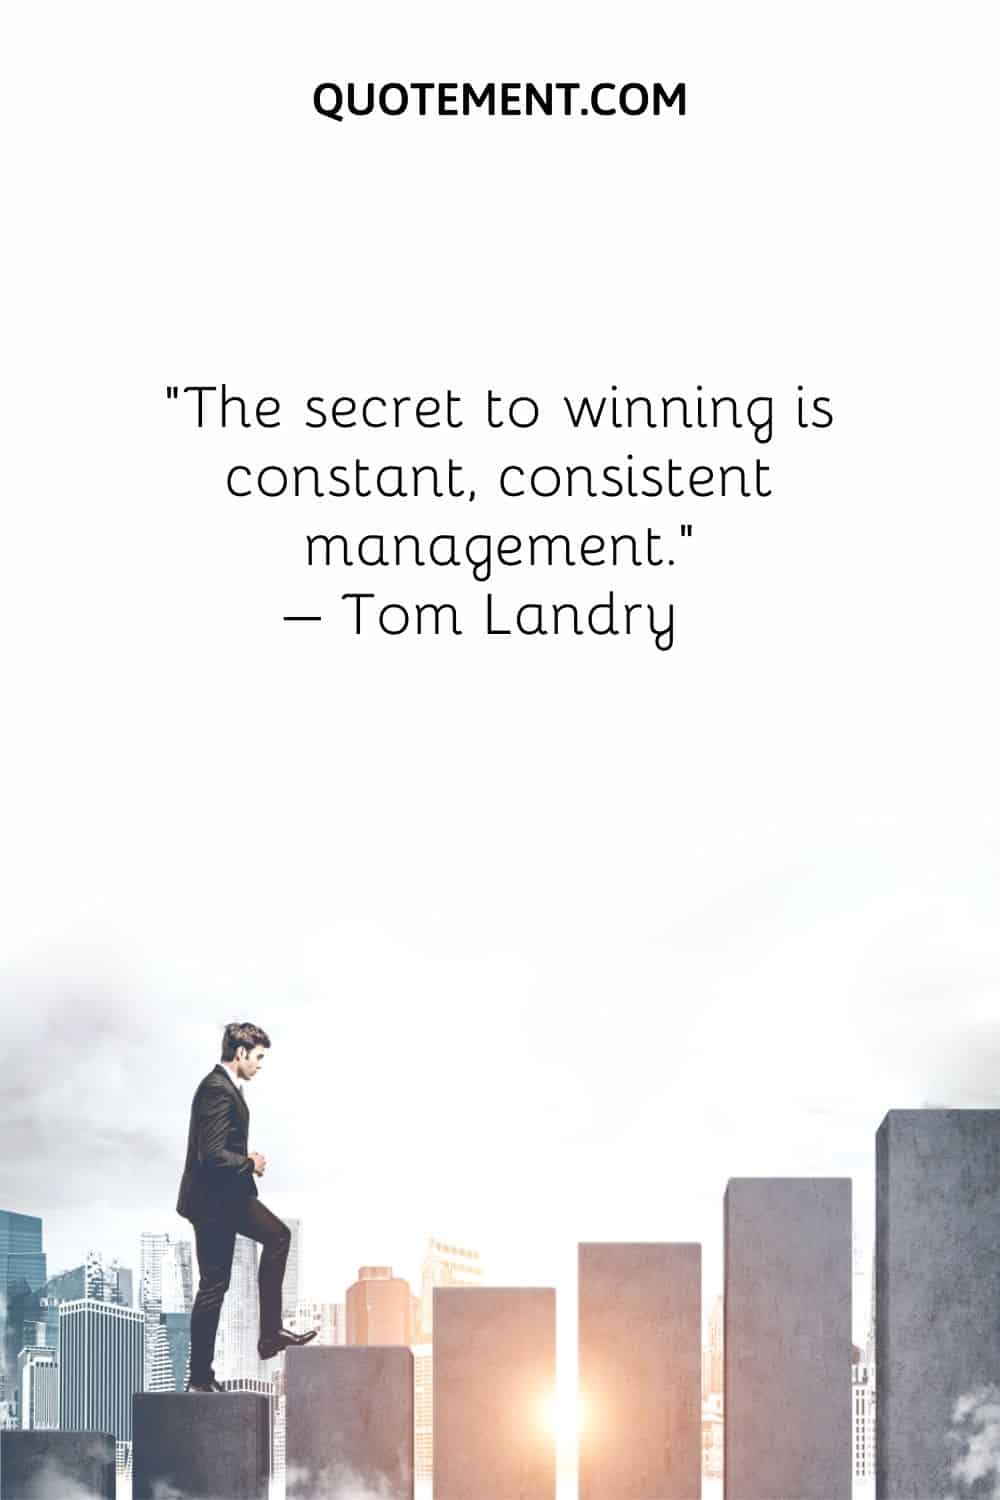 The secret to winning is constant, consistent management